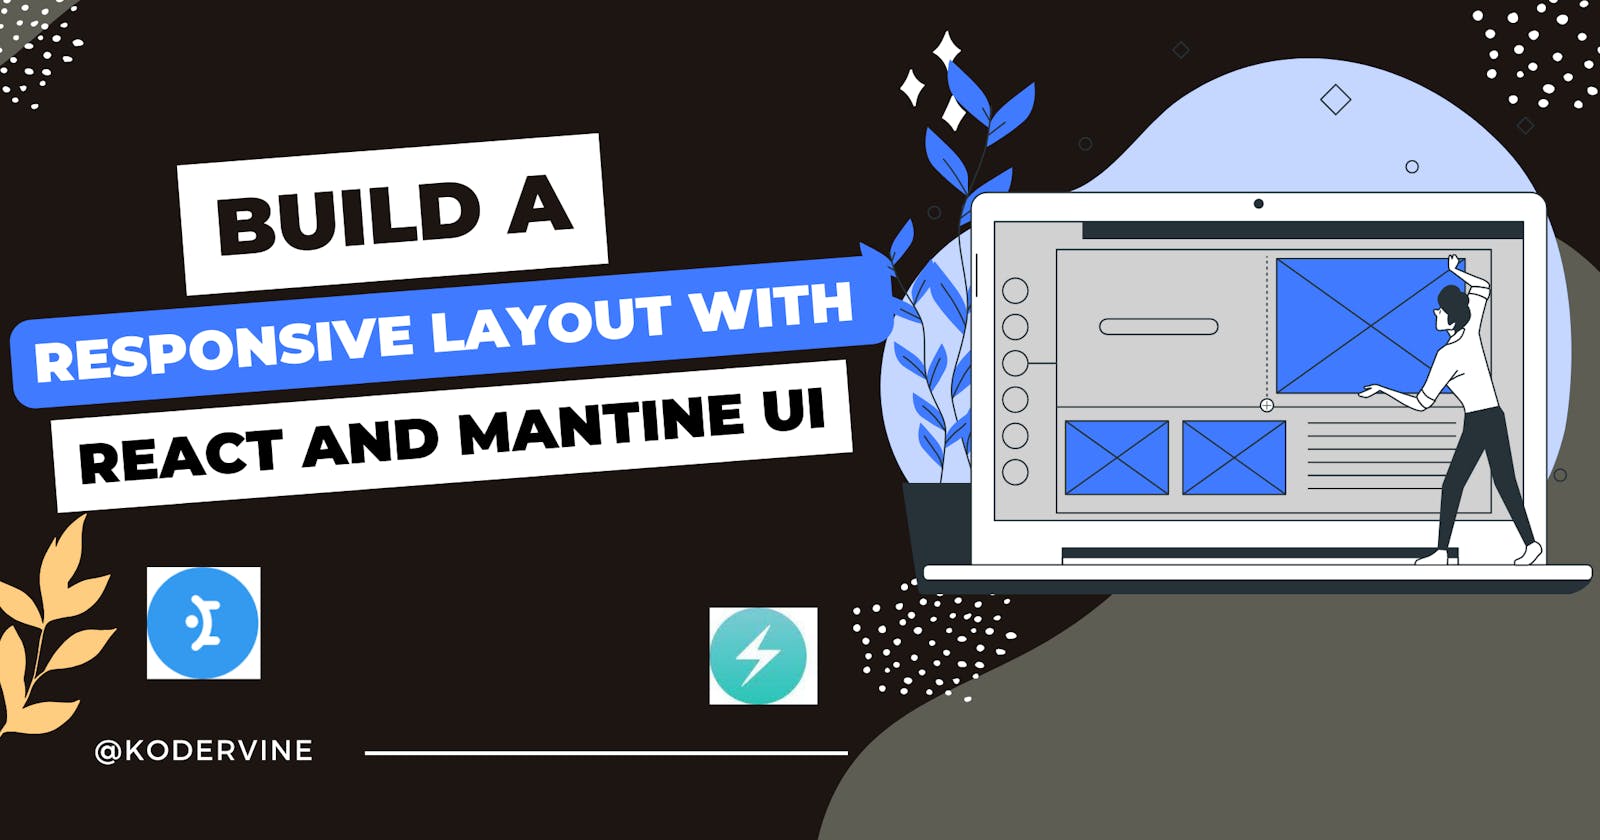 Build a Responsive Layout with React and Mantine UI